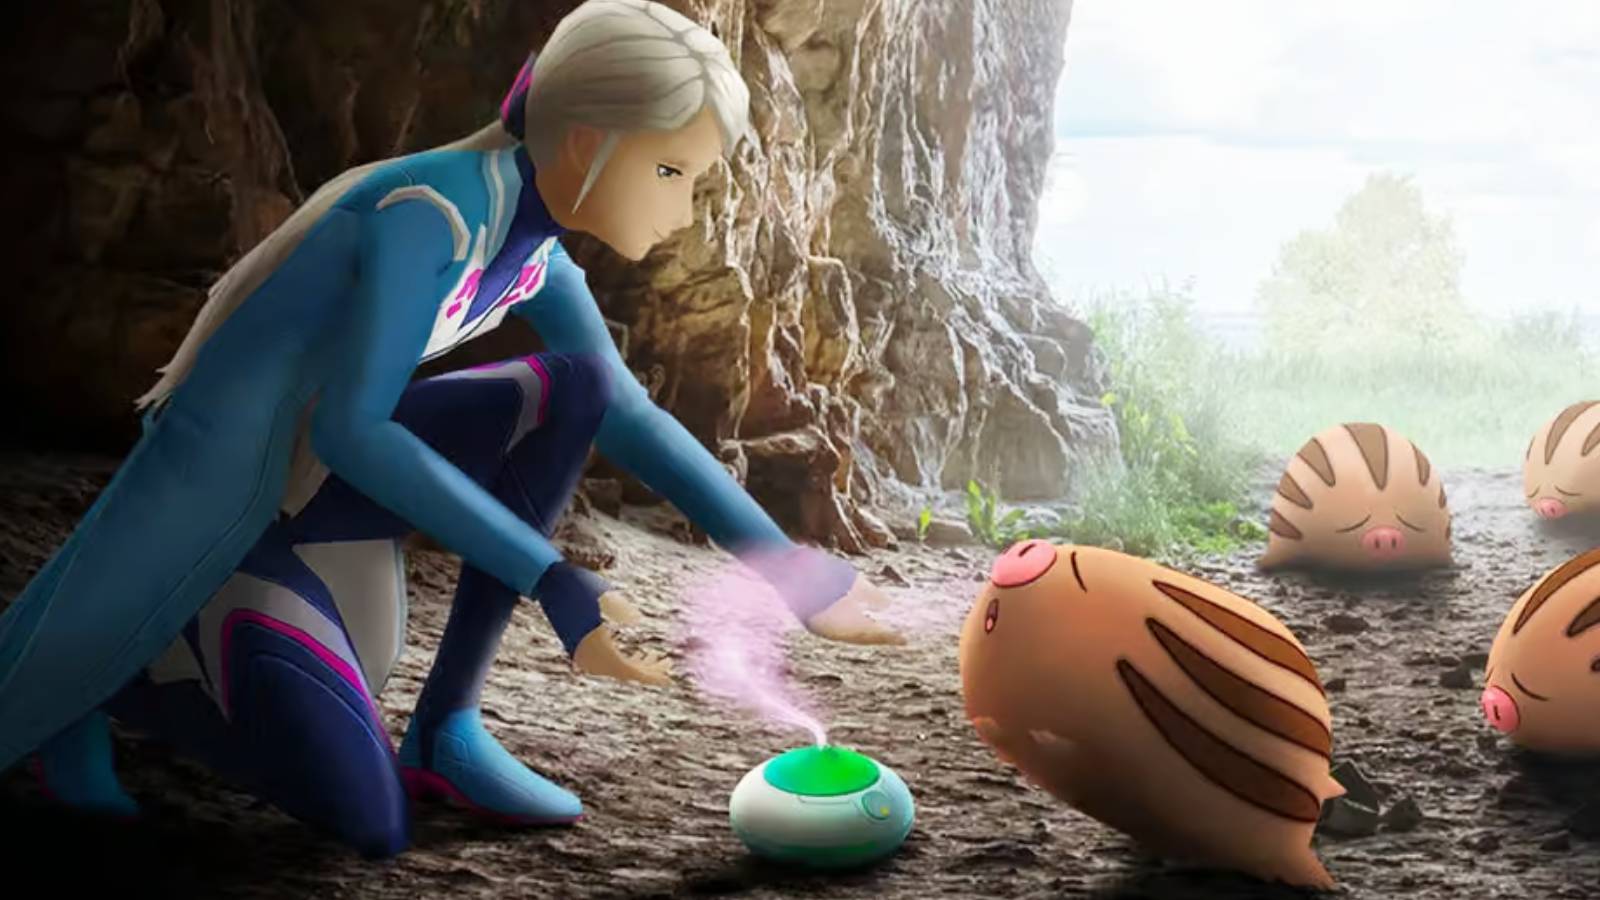 Key art for Pokemon Go shows a trainer interacting with a Swinub over an incense